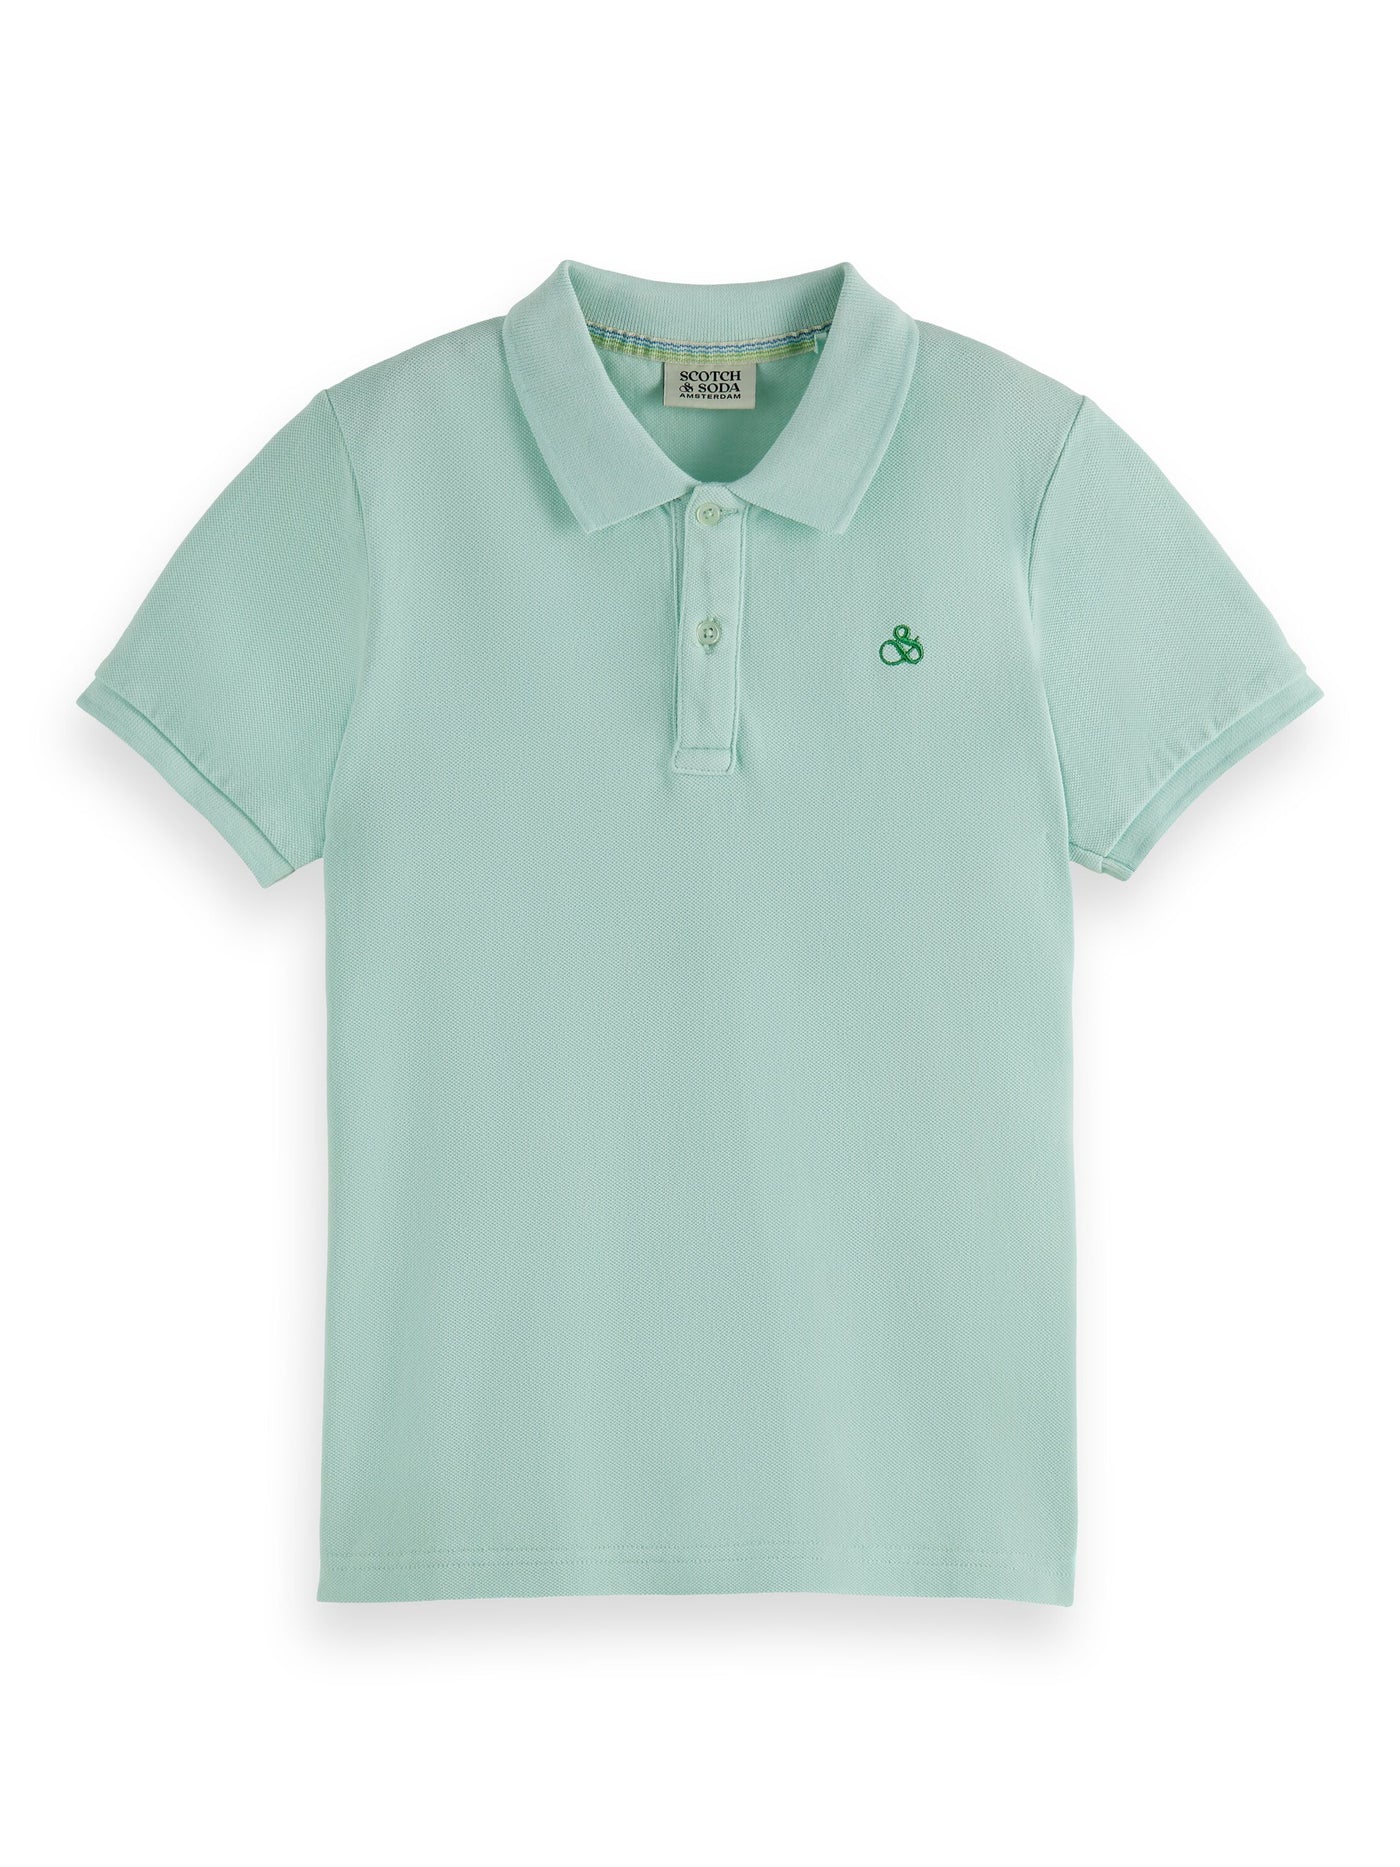 Garment Dyed Short Sleeved Pique Polo